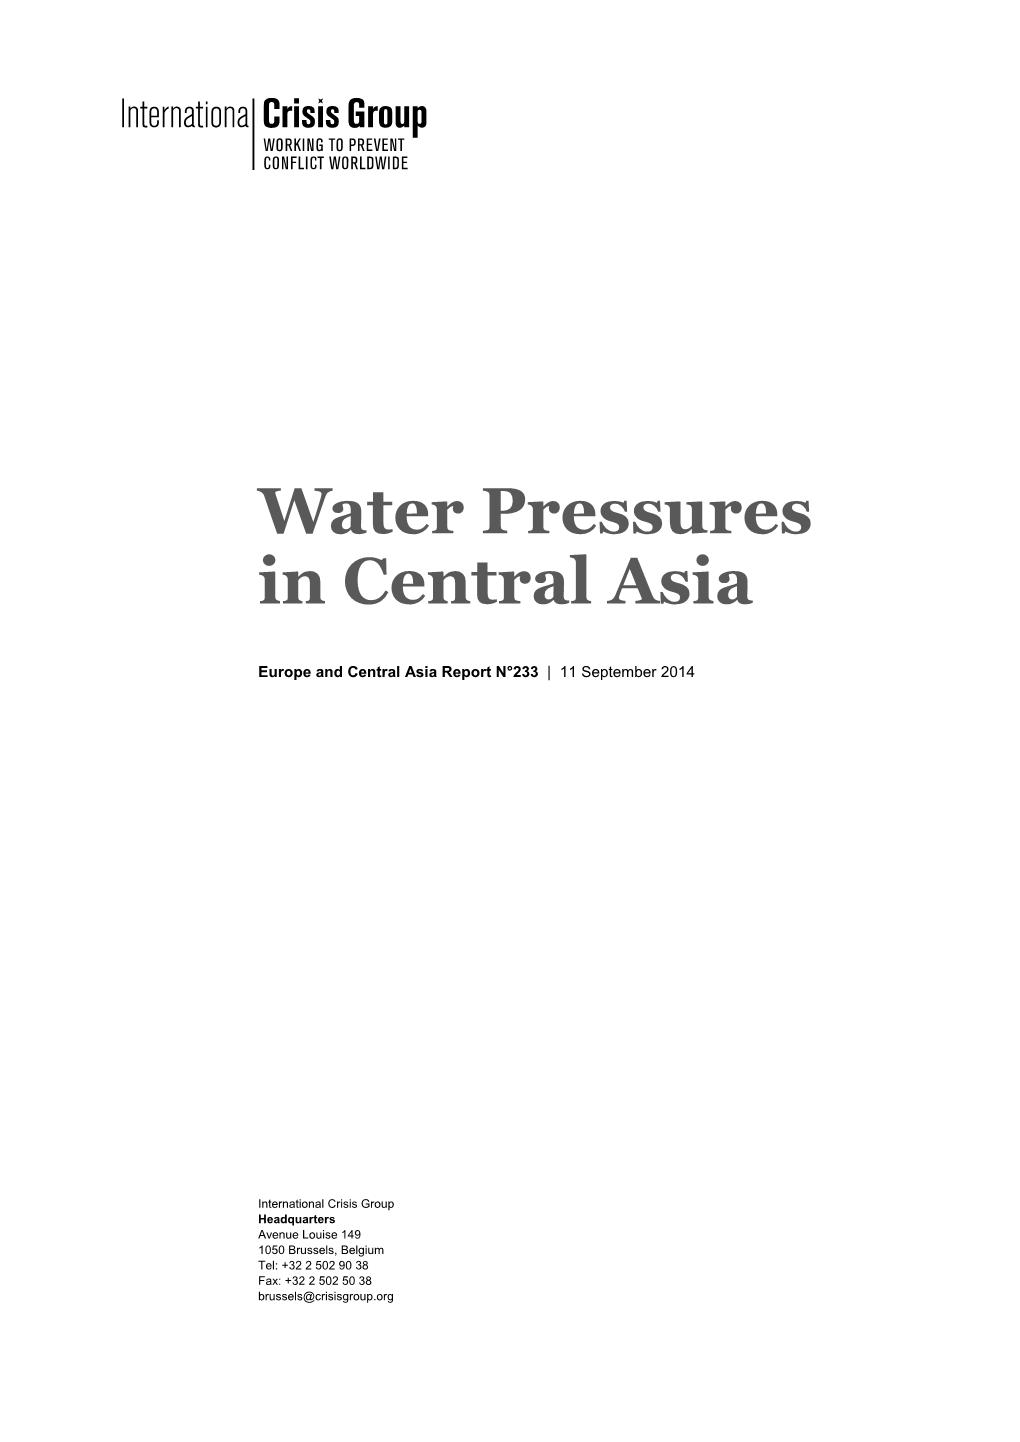 Water Pressures in Central Asia